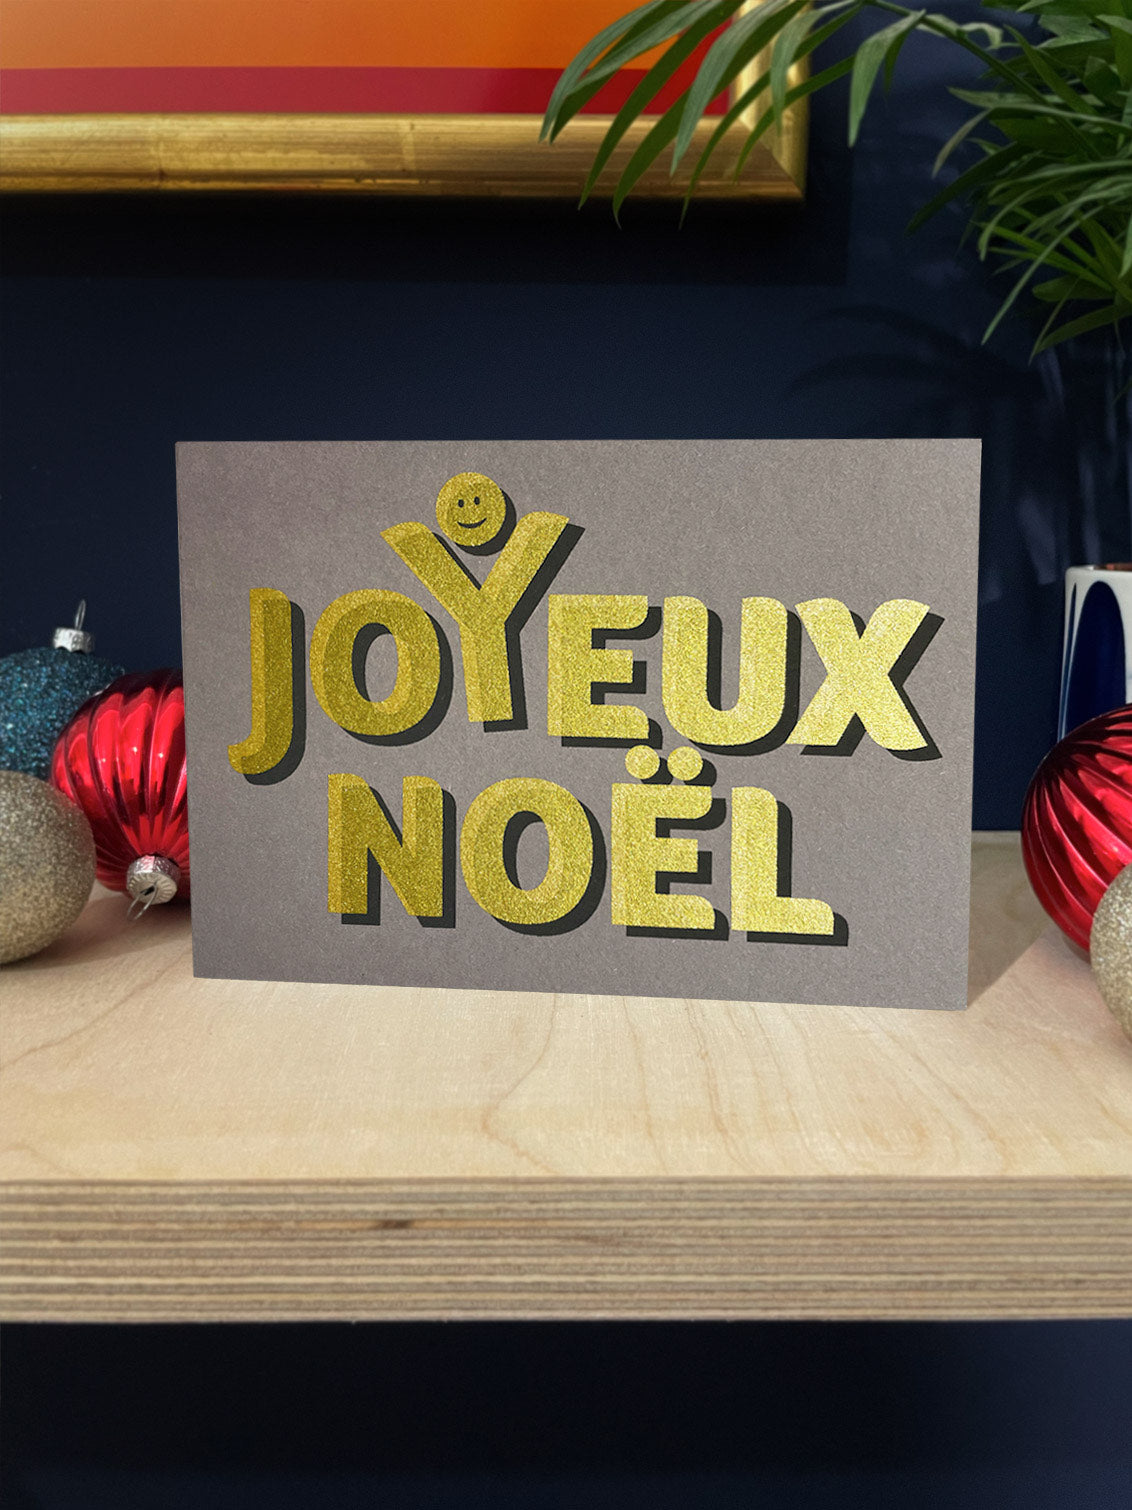 Golden text screenprinted onto grey card stock, spells out Joyeux Noel with a happy face above the Y, as though celebrating. Landscape card stood on a plywood shelf with baubles around against a dark blue wall.